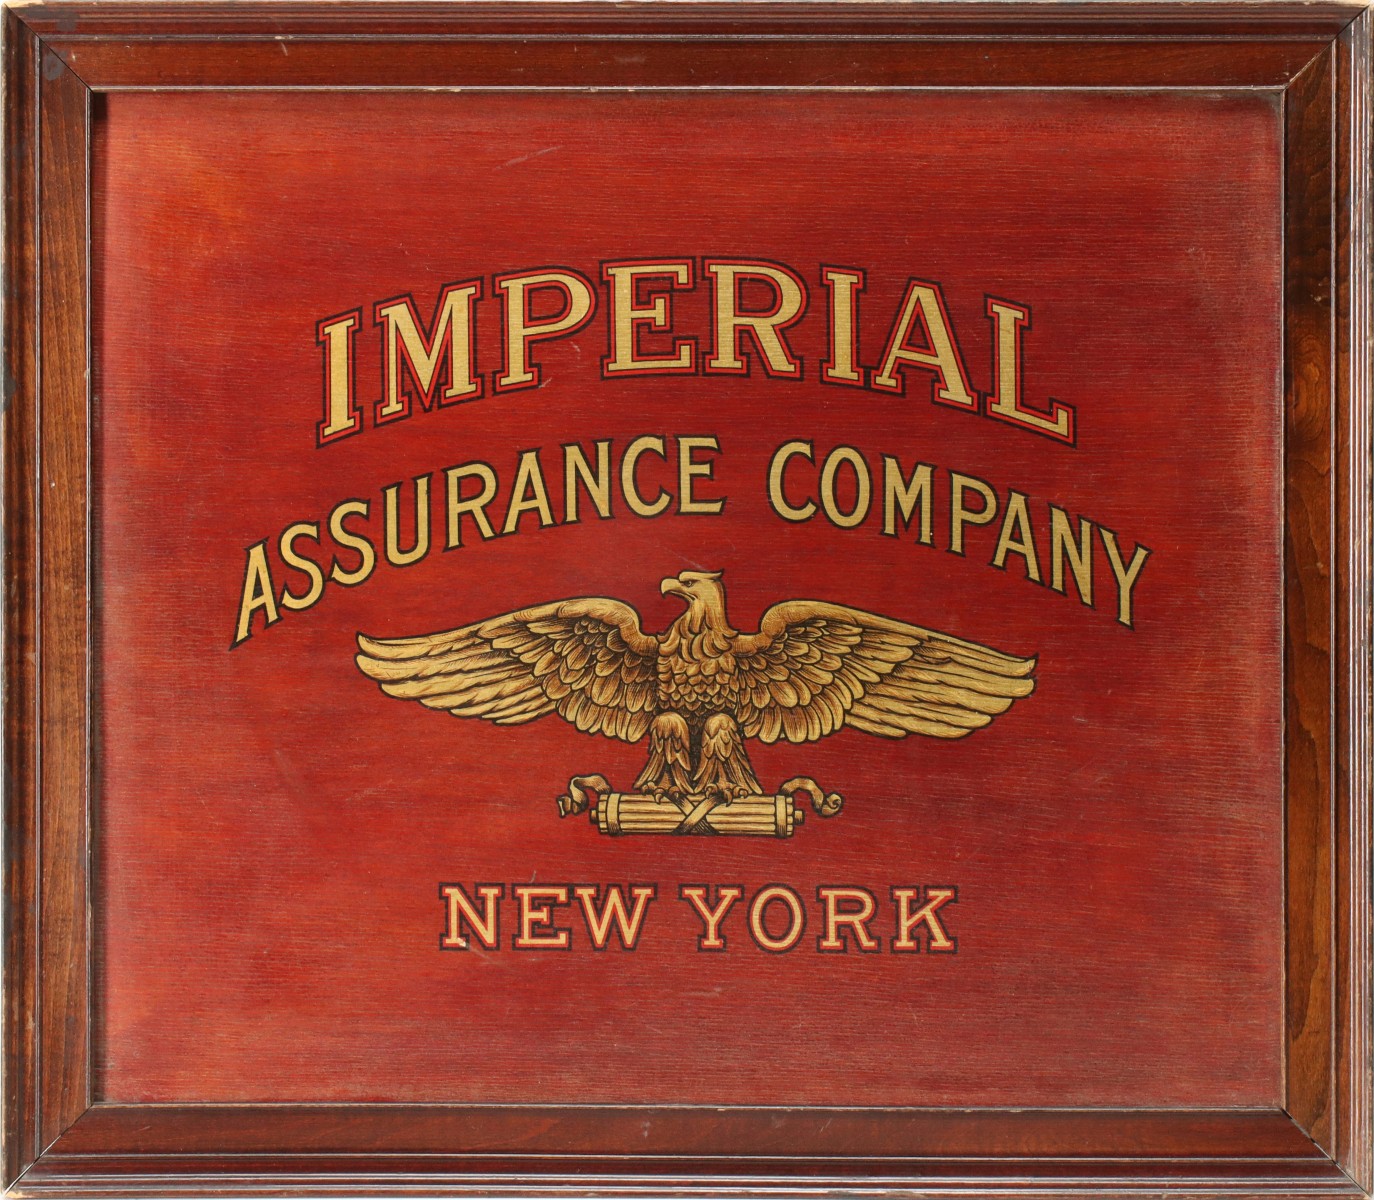 ADVERTISING FOR IMPERIAL ASSURANCE COMPANY NEW YORK